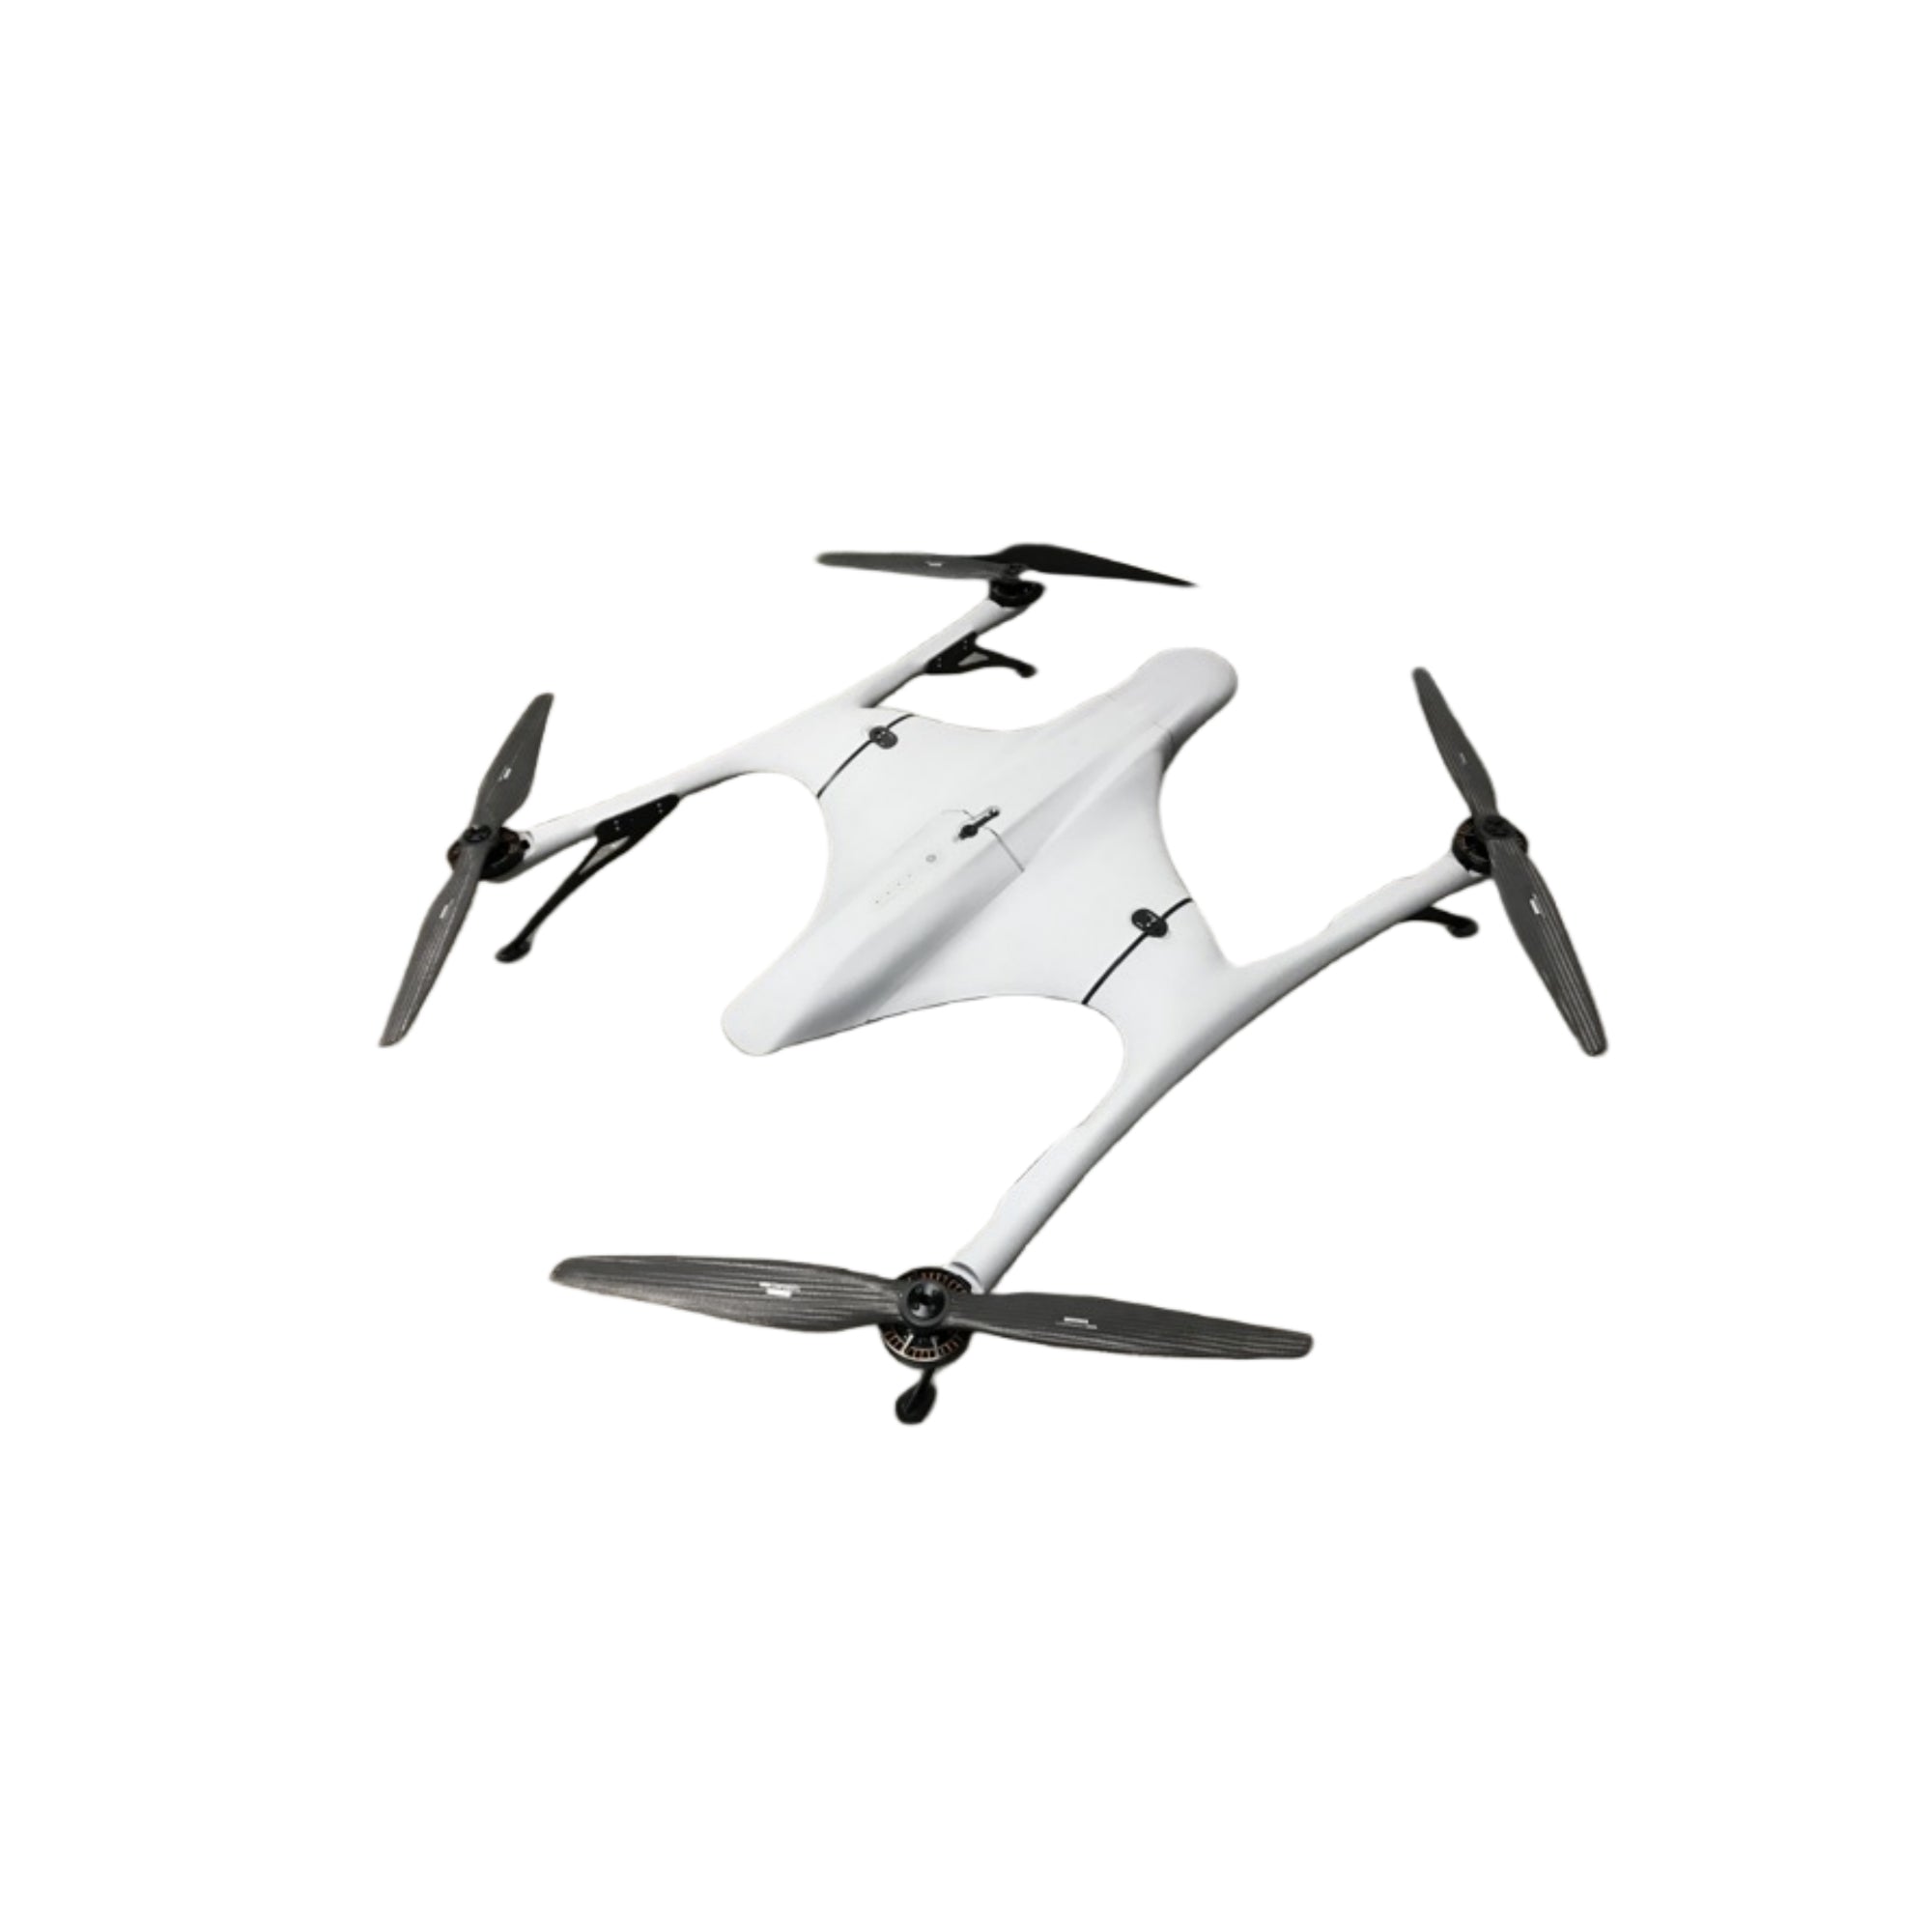 Vesper Multirotor-Aerodynamic Multirotor for Inspection and Mapping - Unmanned RC